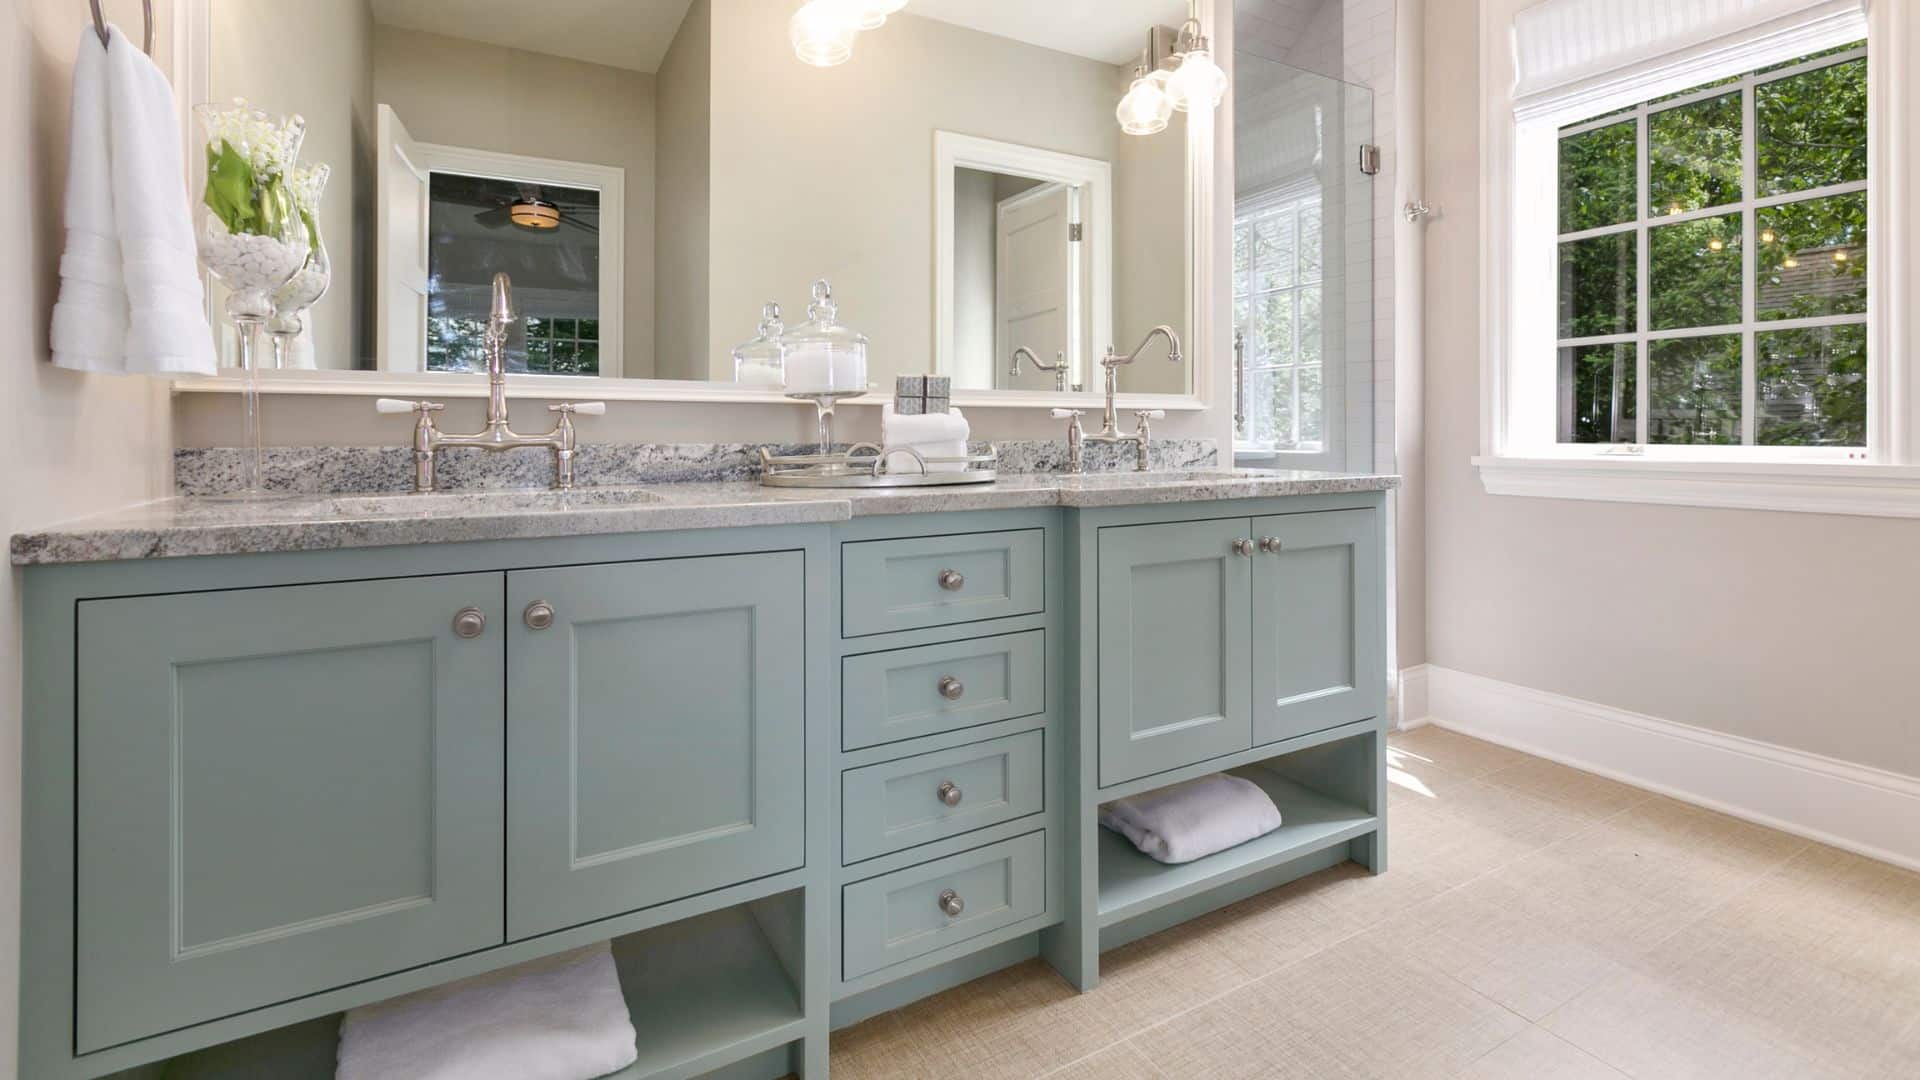 Transitional Bathroom Style with grey cabinets